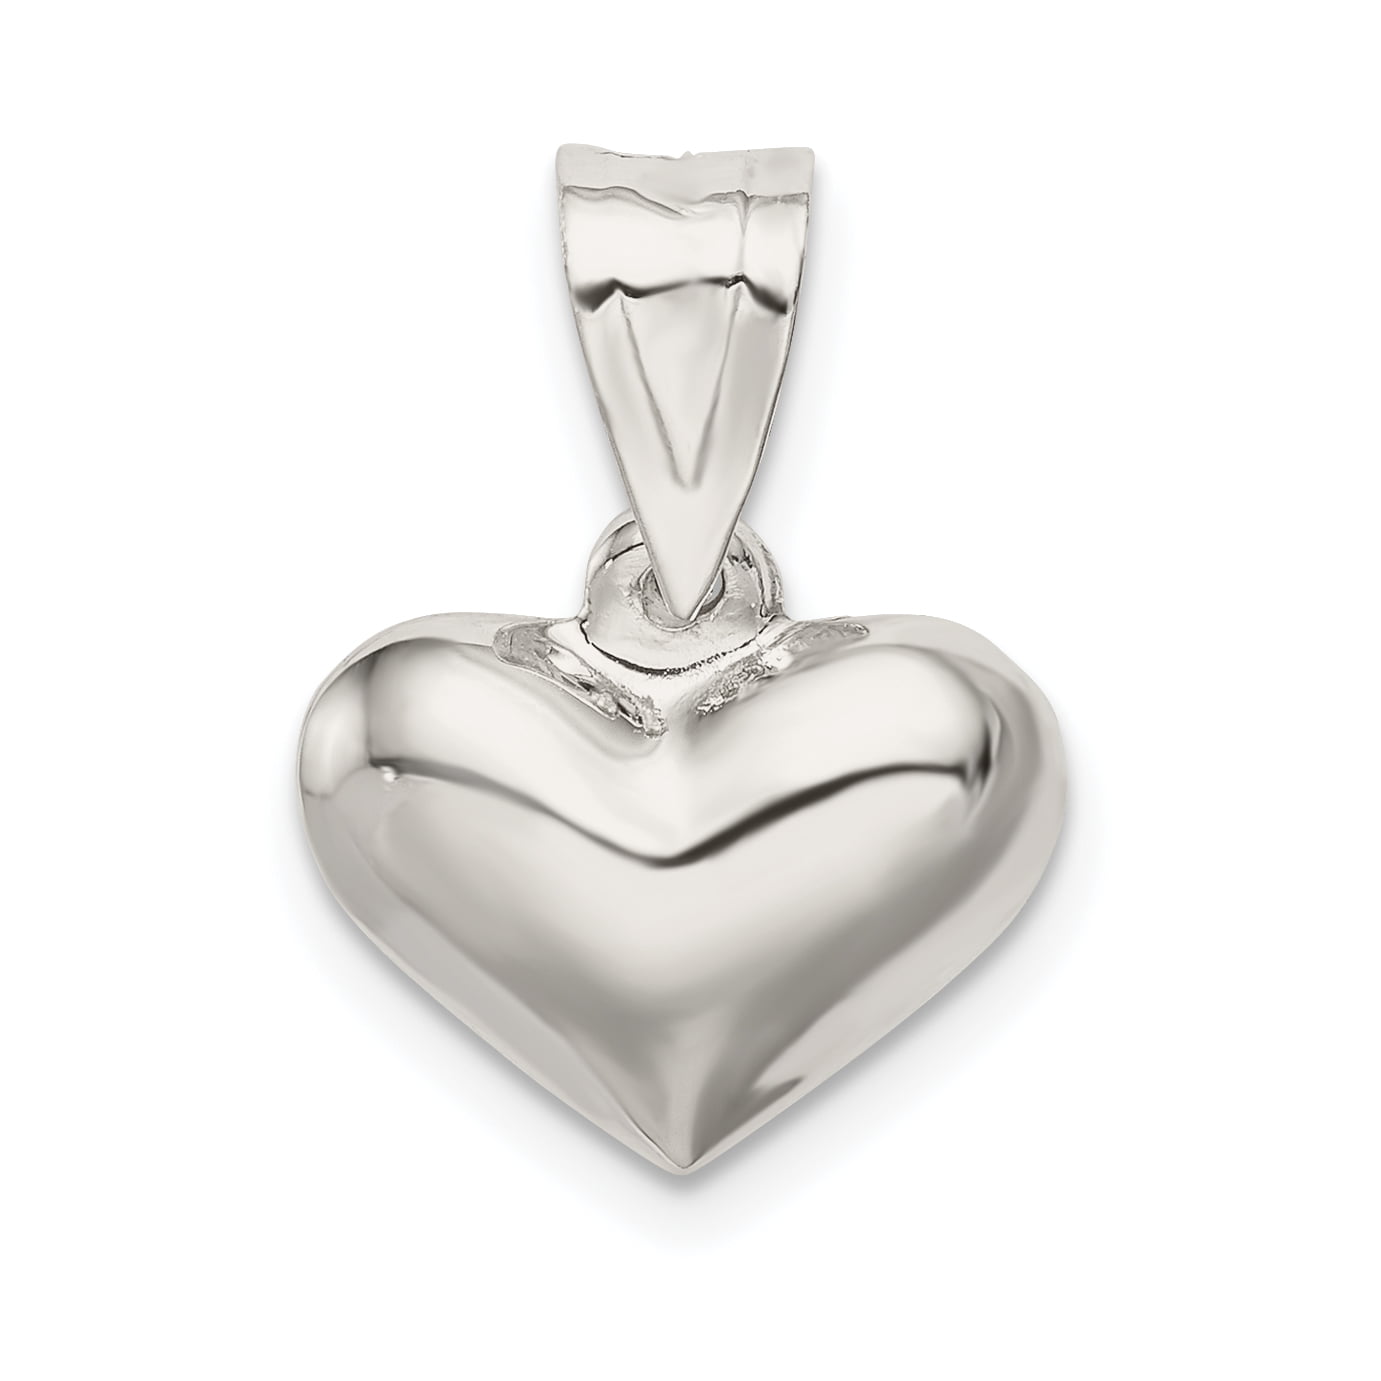 .925 Sterling Silver Puffed Heart Charm Pendant